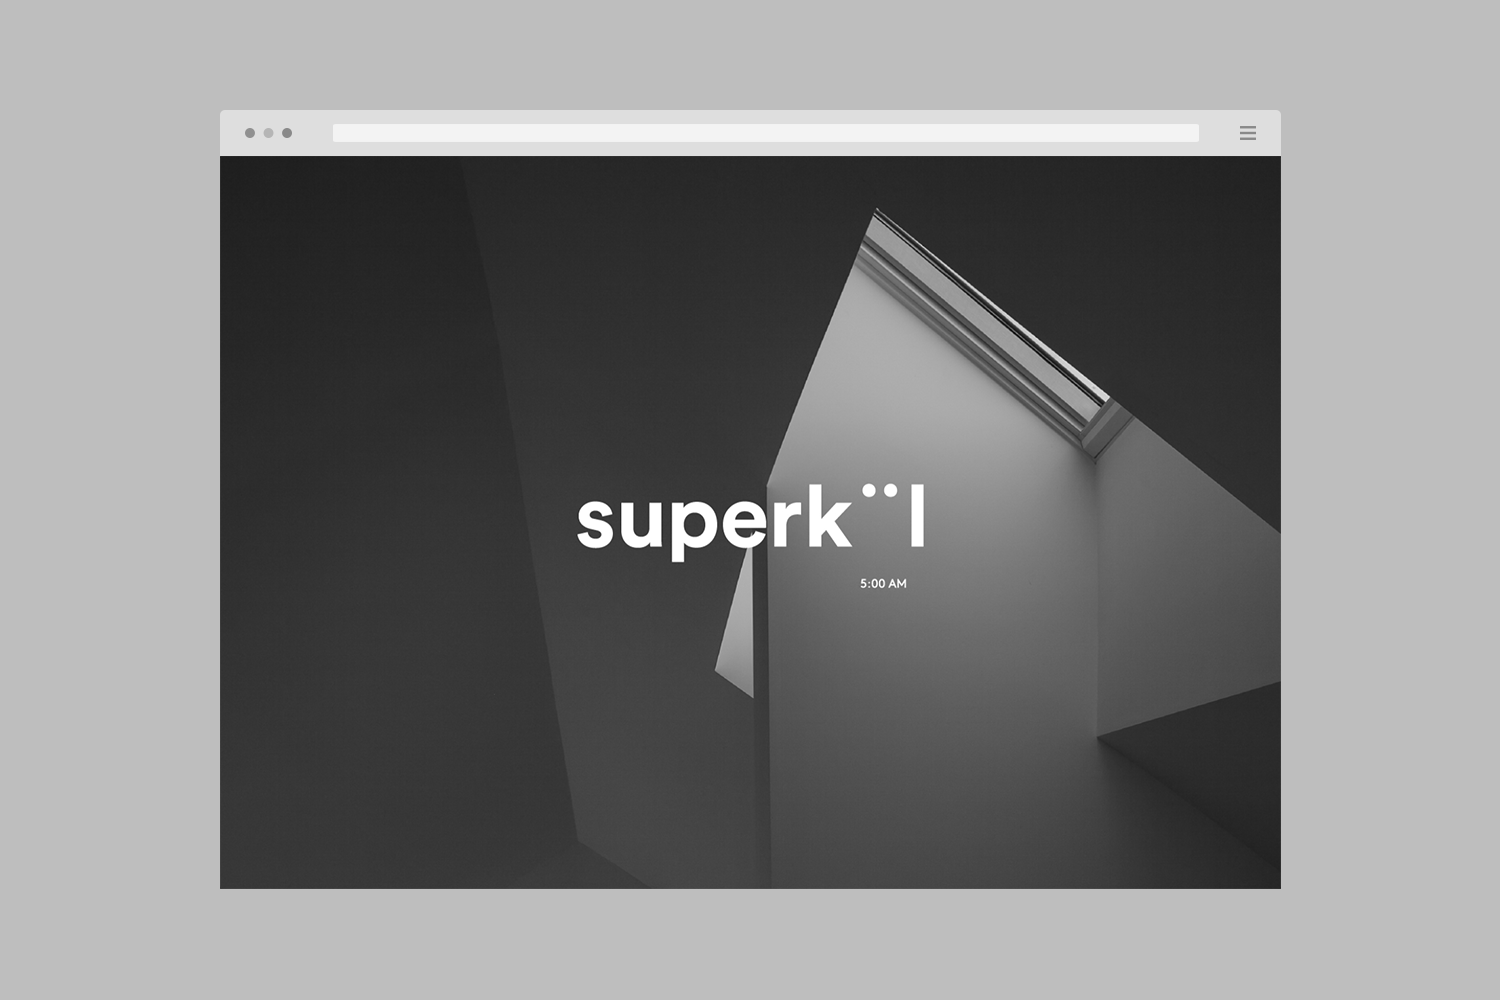 Brand identity and website splash page by Toronto-based graphic design studio Blok for Canadian architecture firm Superkül